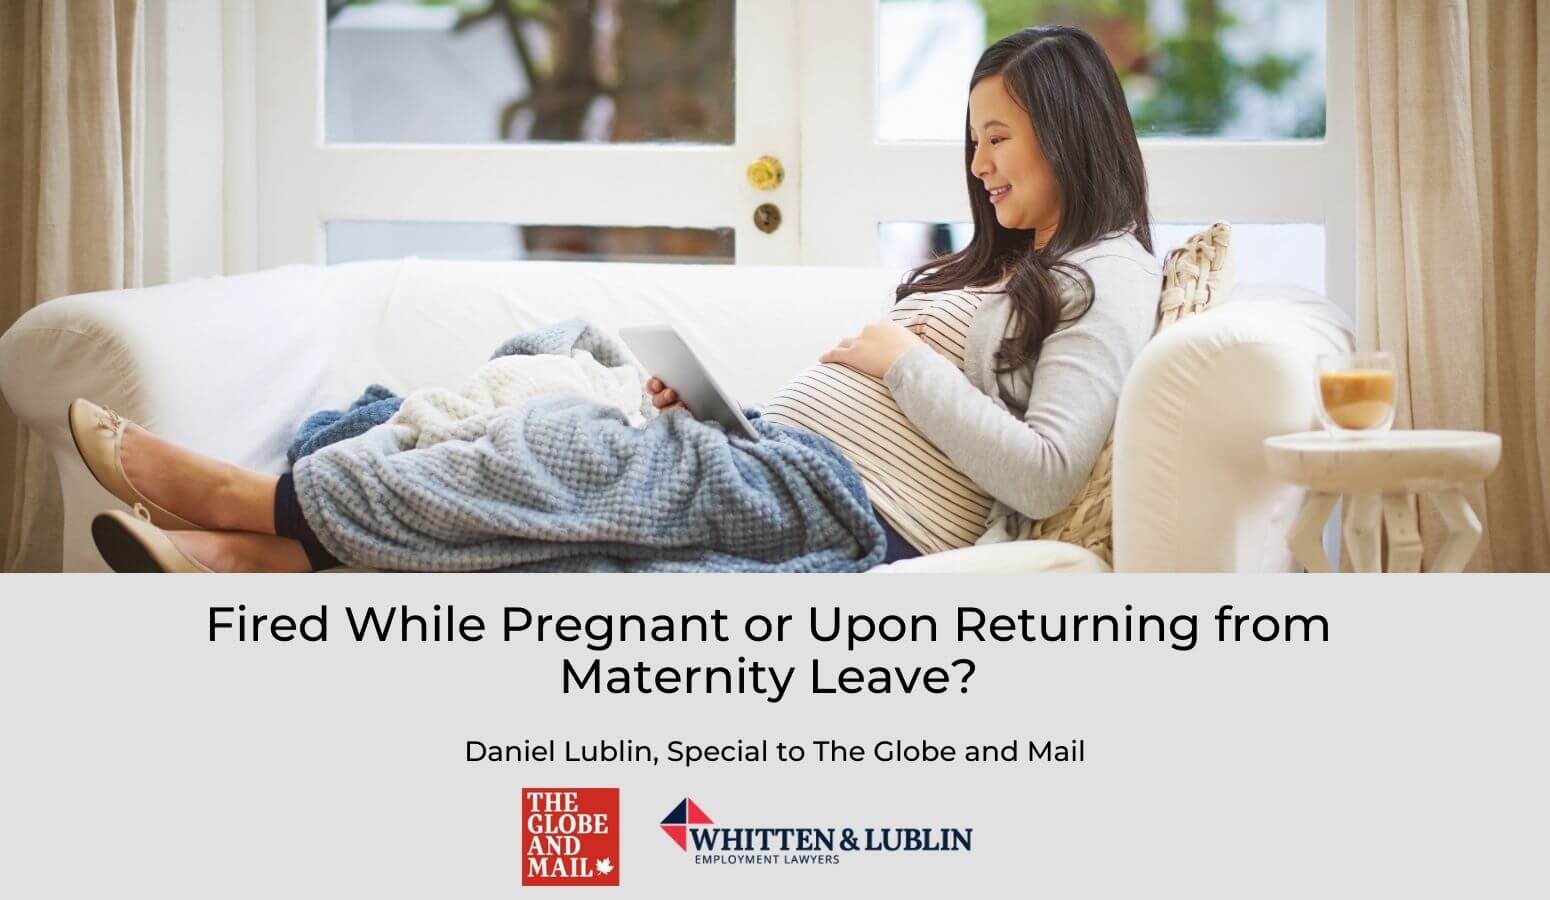 Featured image for “Fired While Pregnant or Upon Returning from Maternity Leave?”